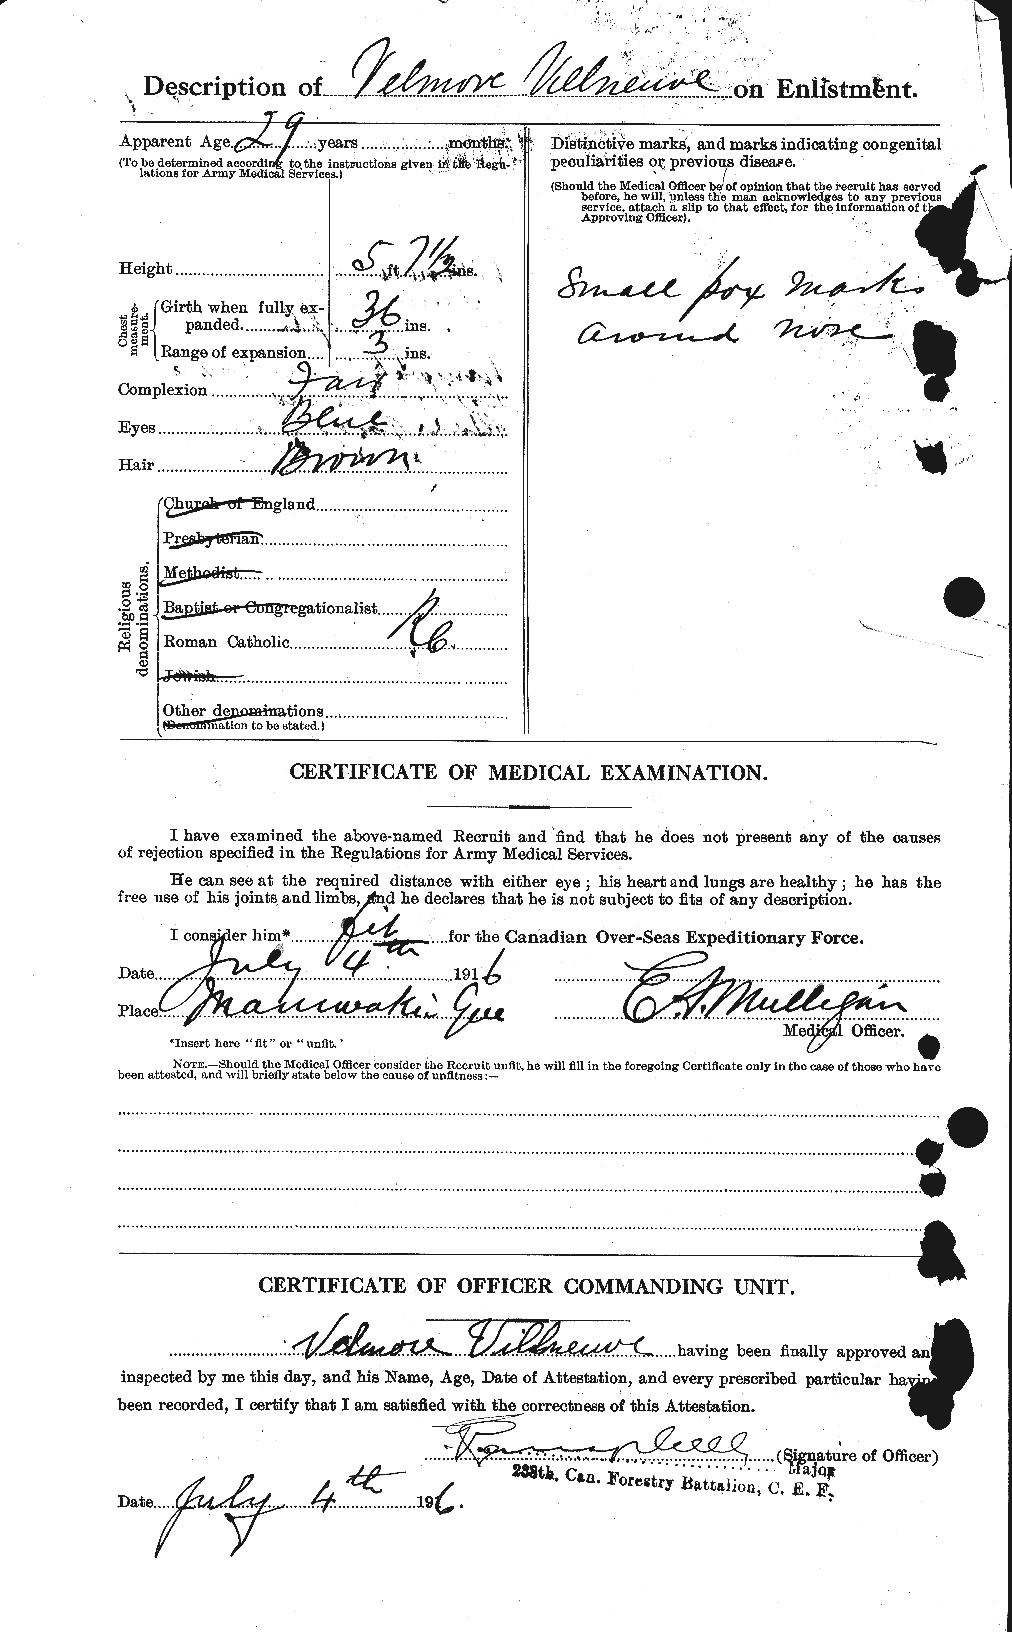 Personnel Records of the First World War - CEF 653907b